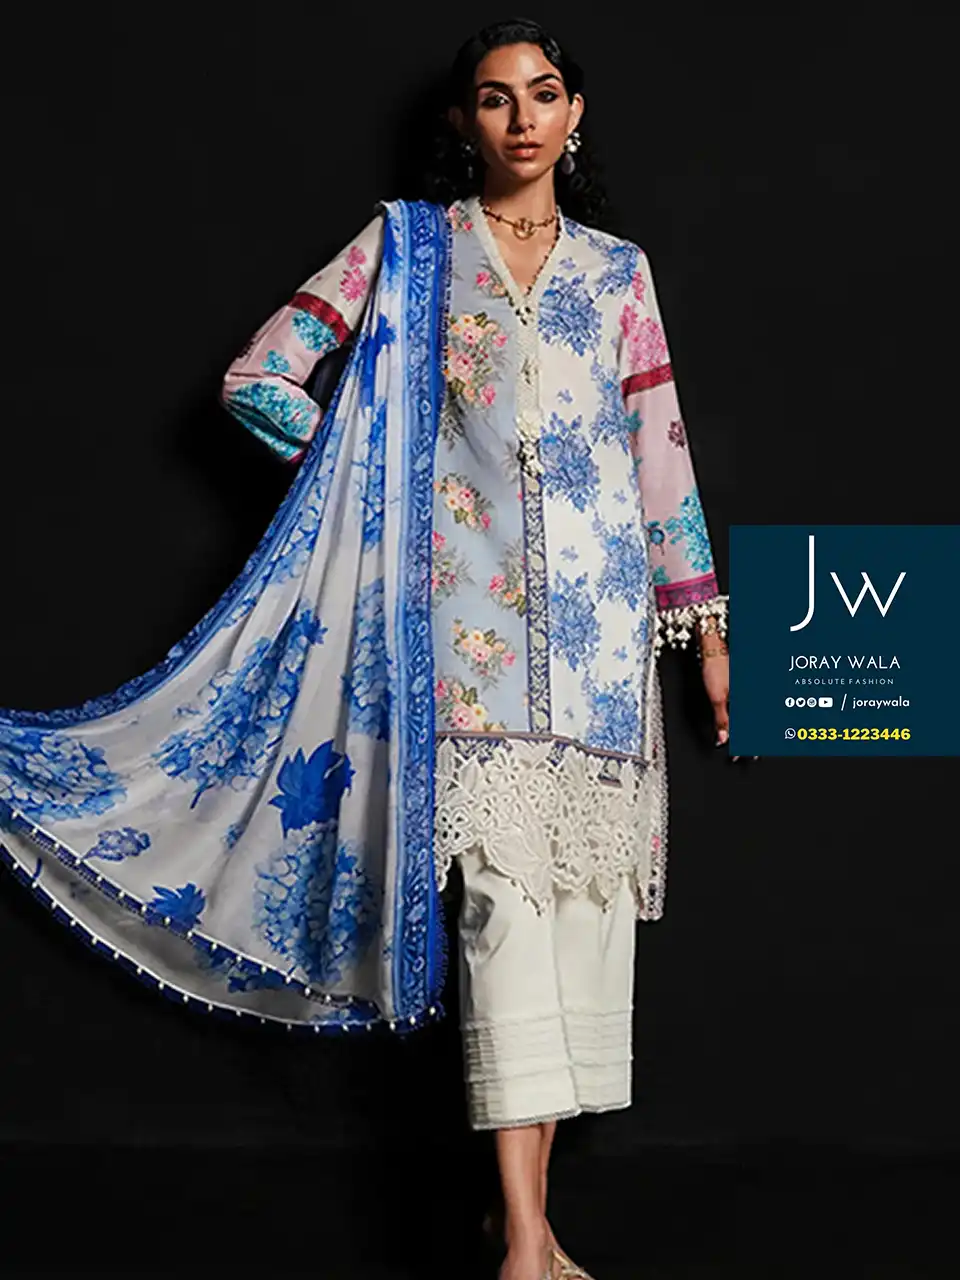 Party wear fancy Lawn Master Copy M241 003A 24 with free delivery available at joraywala